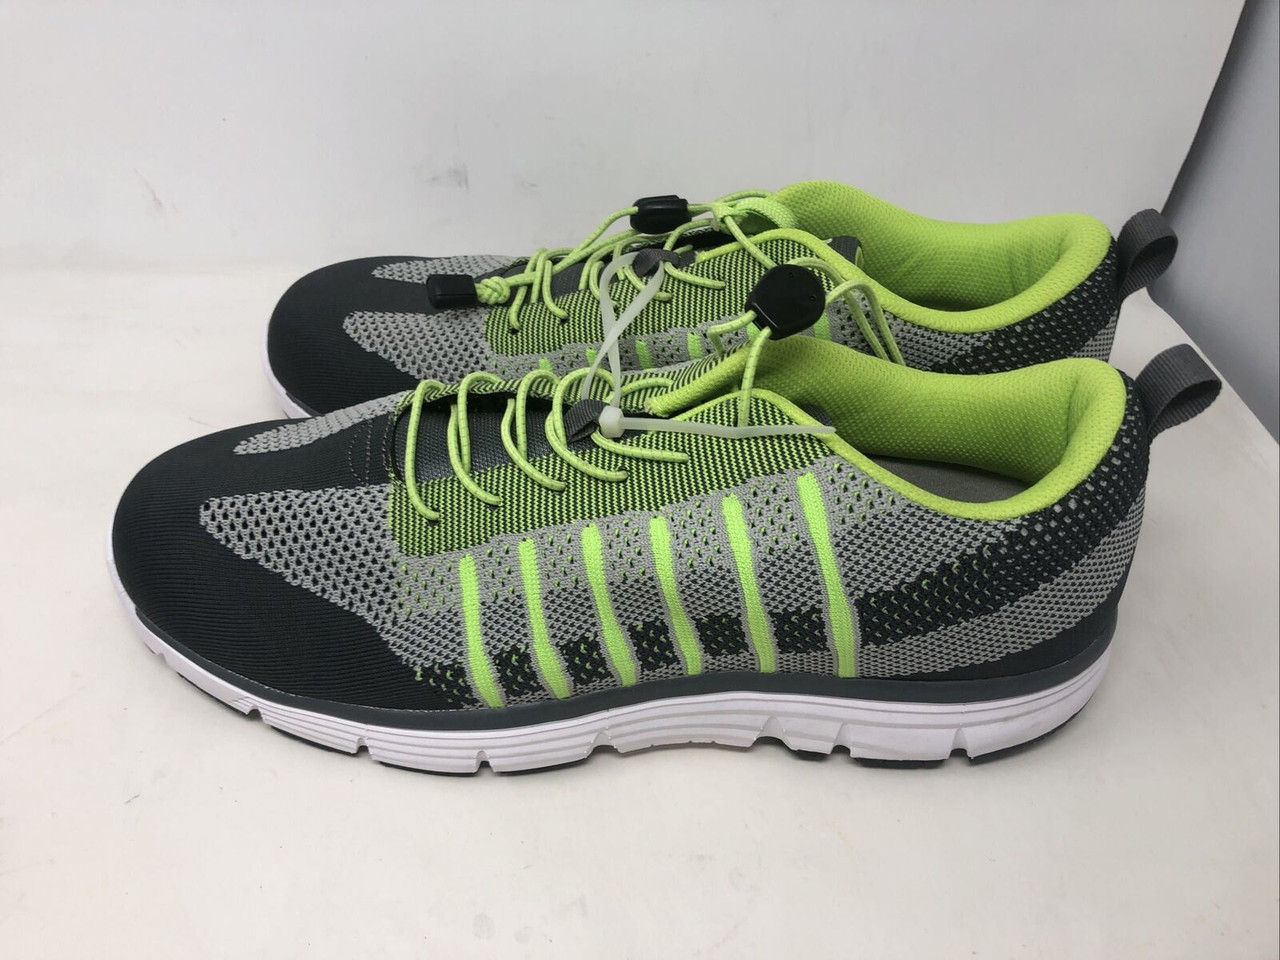 APEX ORTHOPEDIC DIABETIC FOOTWEAR SHOES SNEAKERS LIME- A7200 SIZE US 15 M - NEW